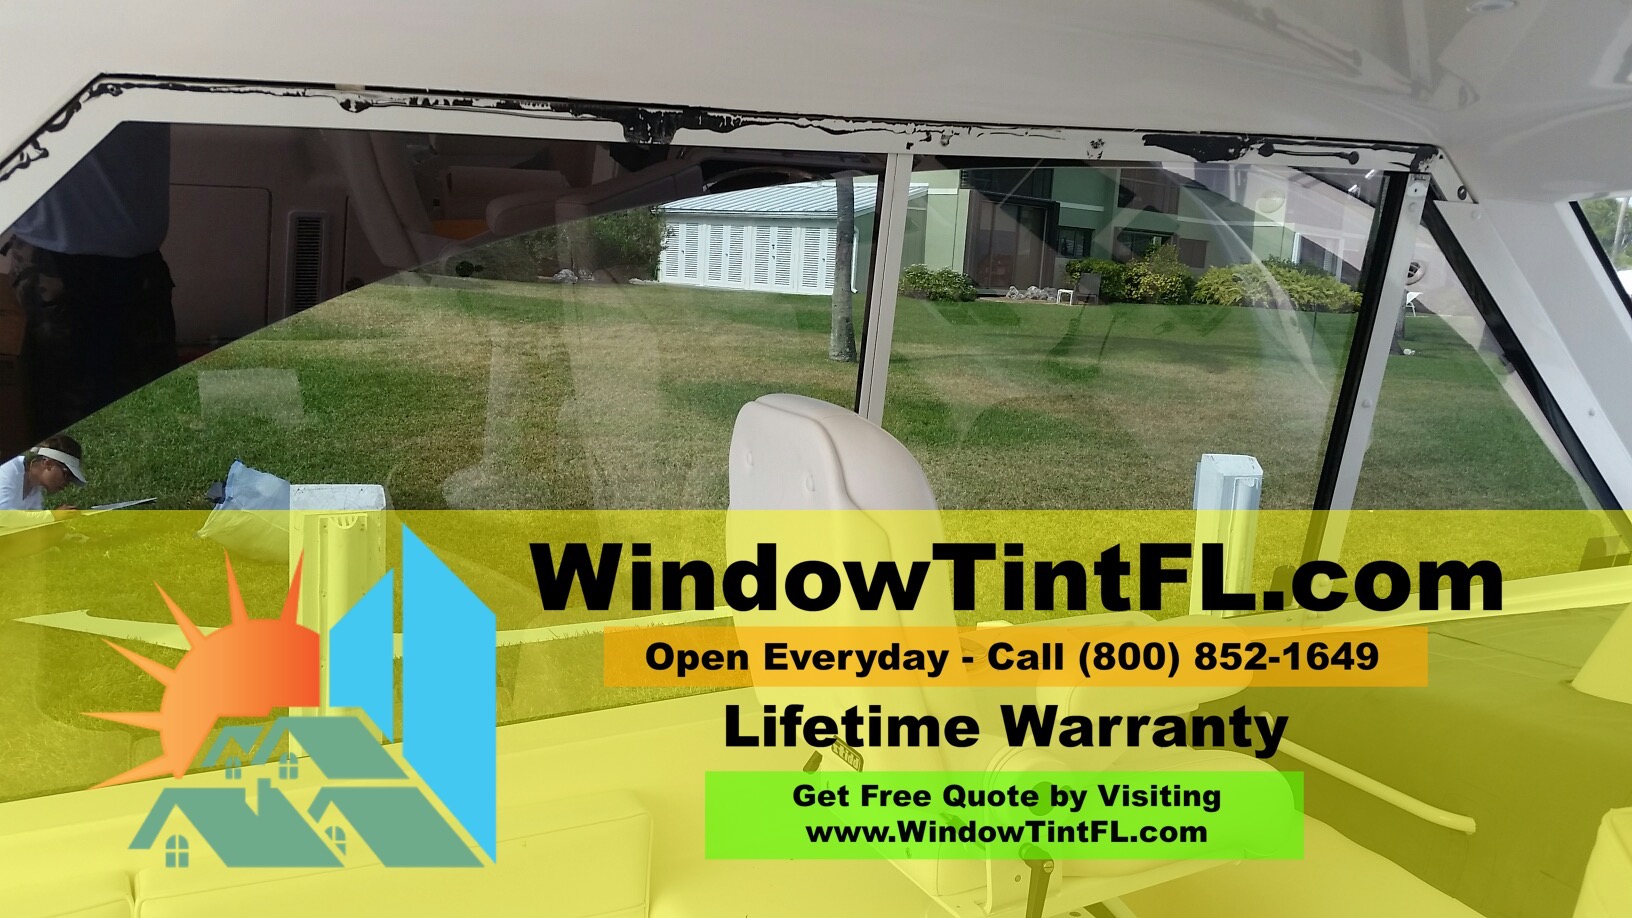 Boat Window Tint Pictures - Jacksonville, Florida